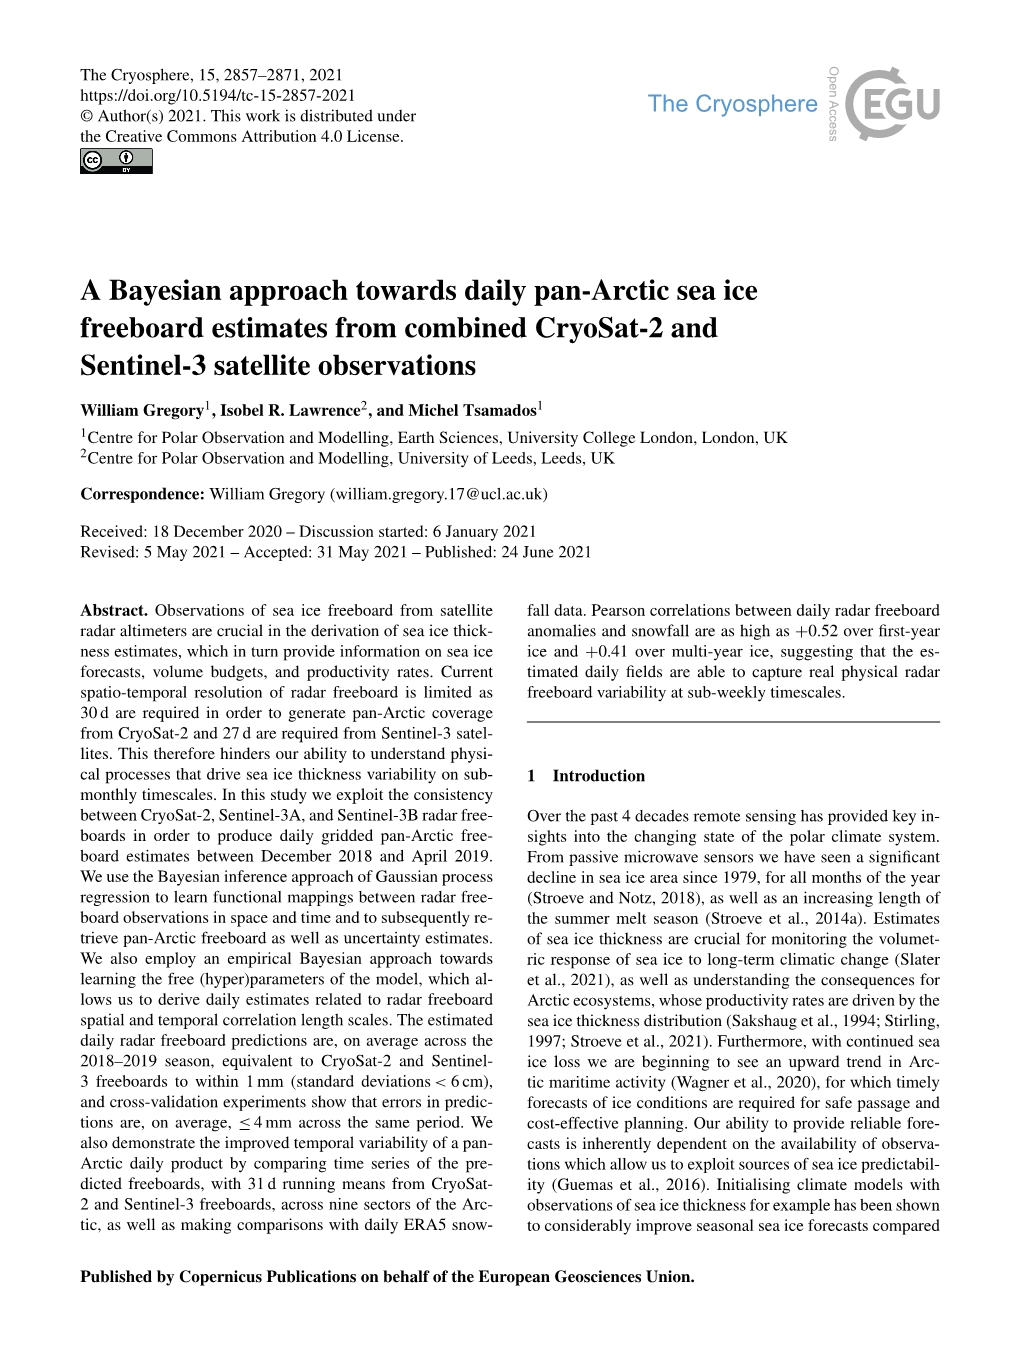 A Bayesian Approach Towards Daily Pan-Arctic Sea Ice Freeboard Estimates from Combined Cryosat-2 and Sentinel-3 Satellite Observations